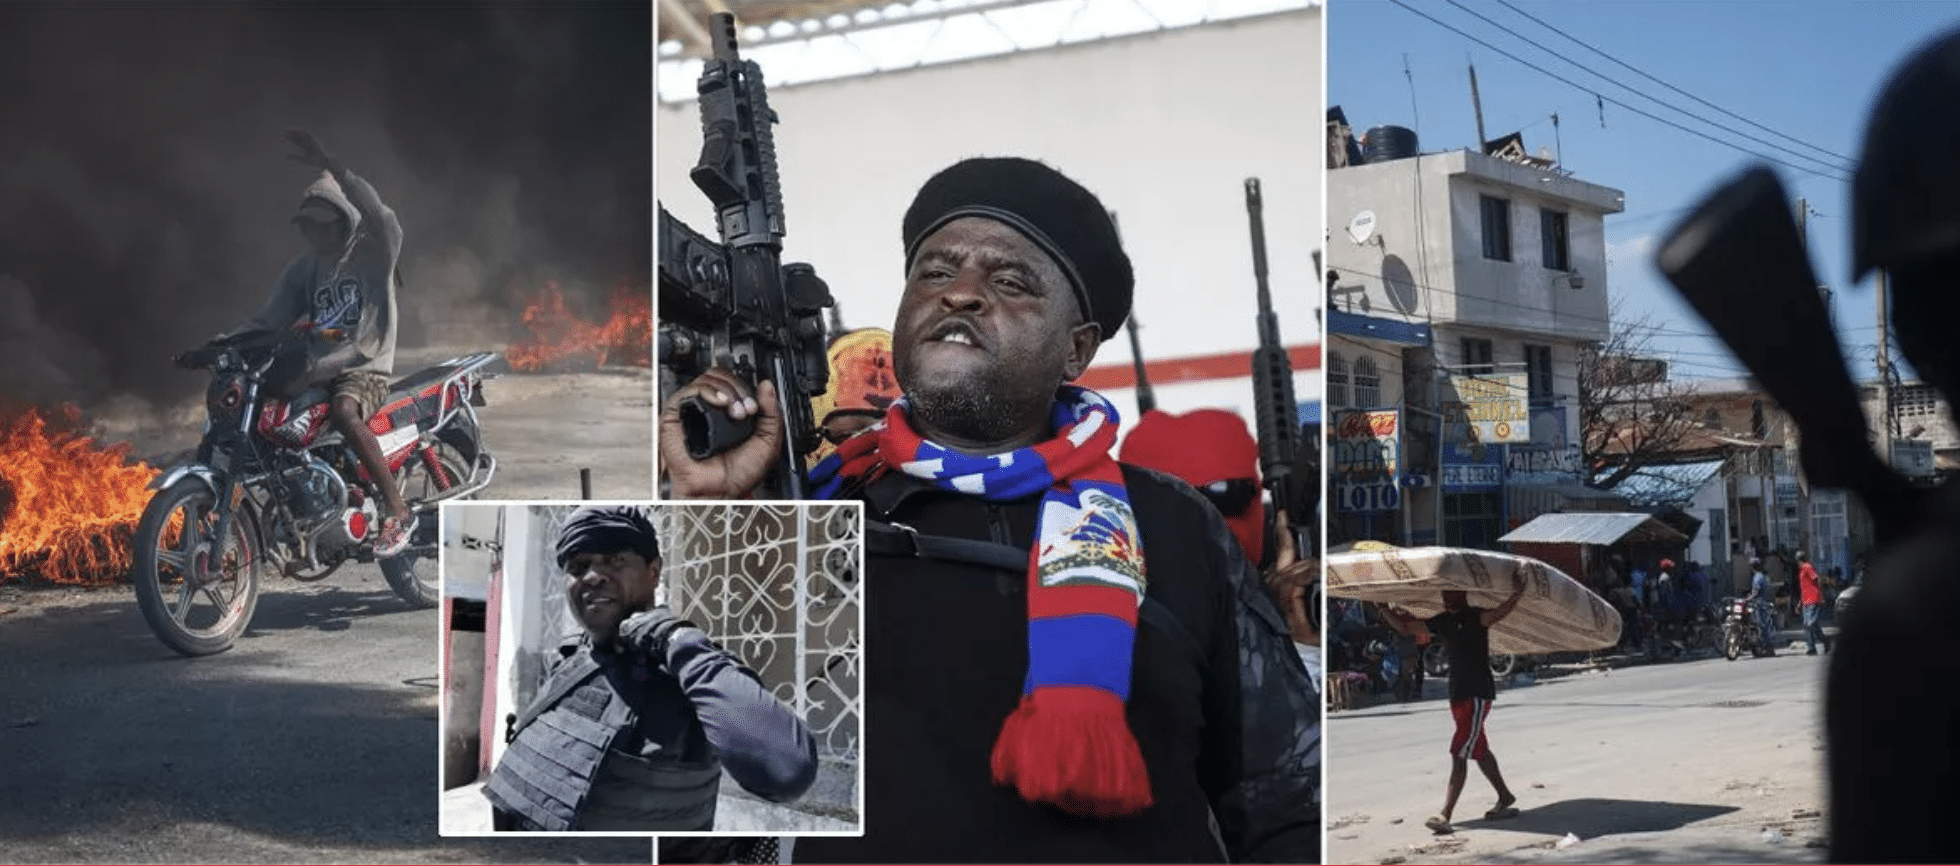 Ex-cop turned mob boss now terrorizing Haiti, ‘burning victims alive and feeding their corpses to animals’